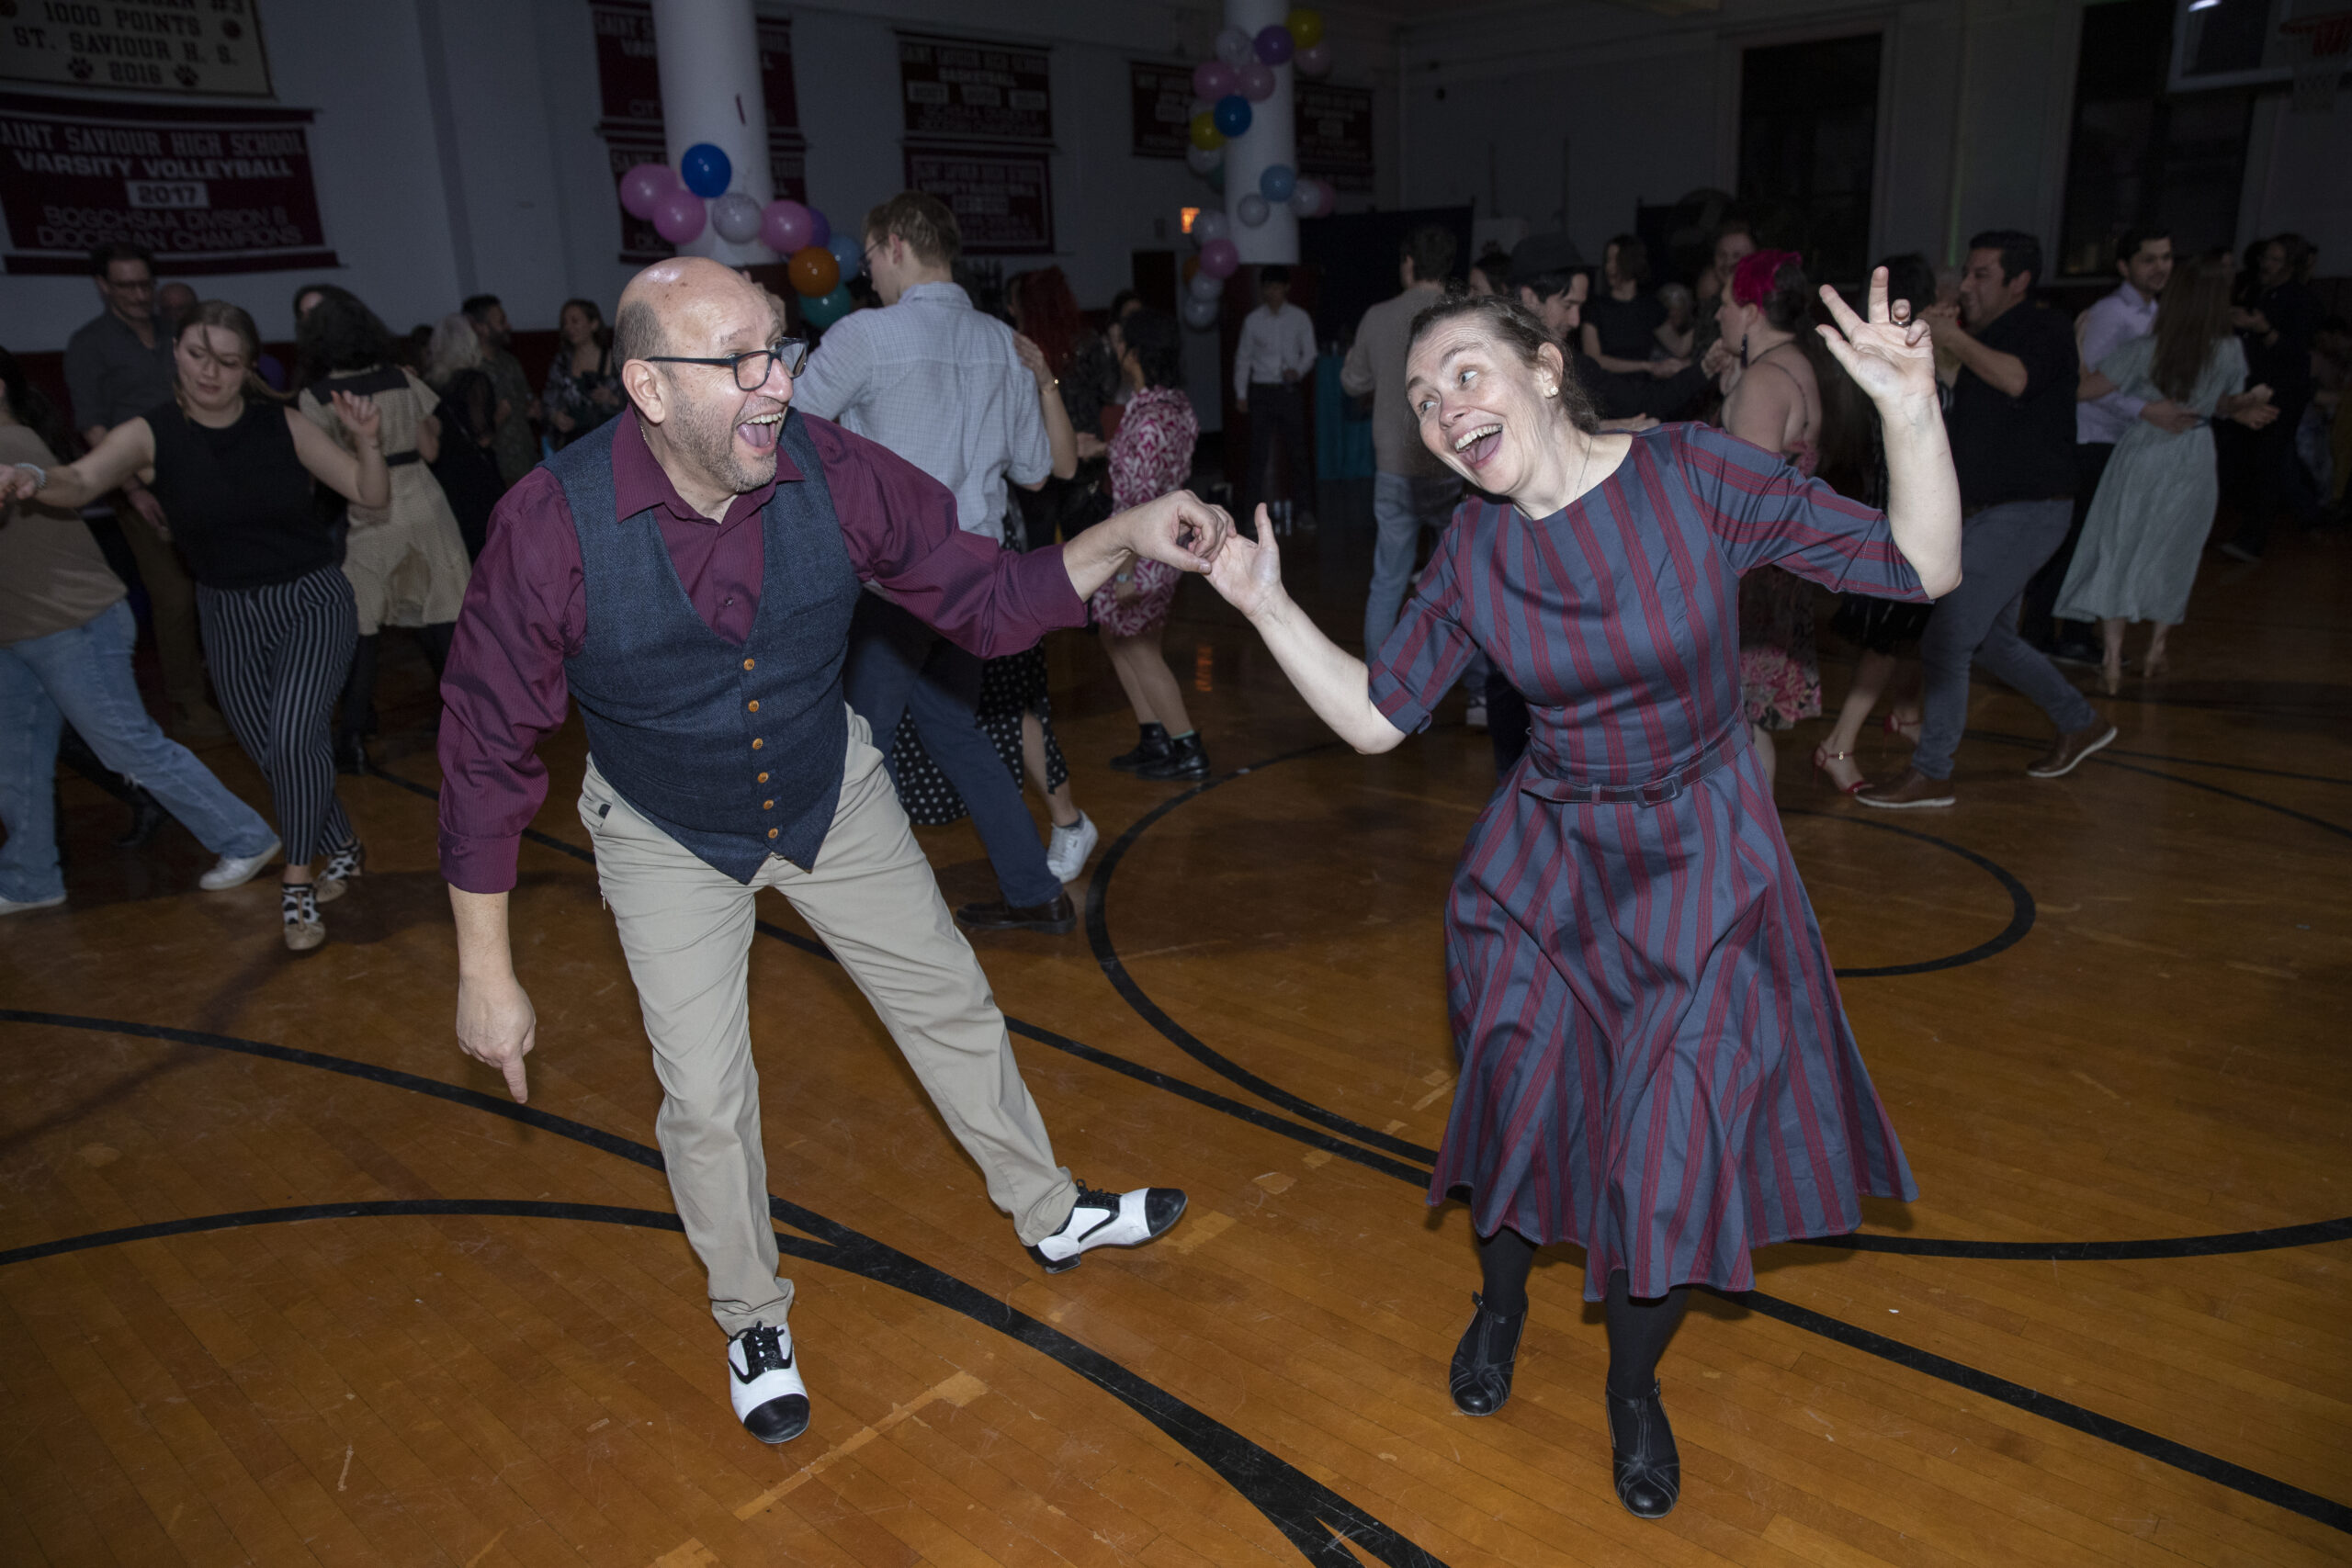 It takes great music to bring out this kind of movement and joy.Photos: John McCarten/Brooklyn Eagle